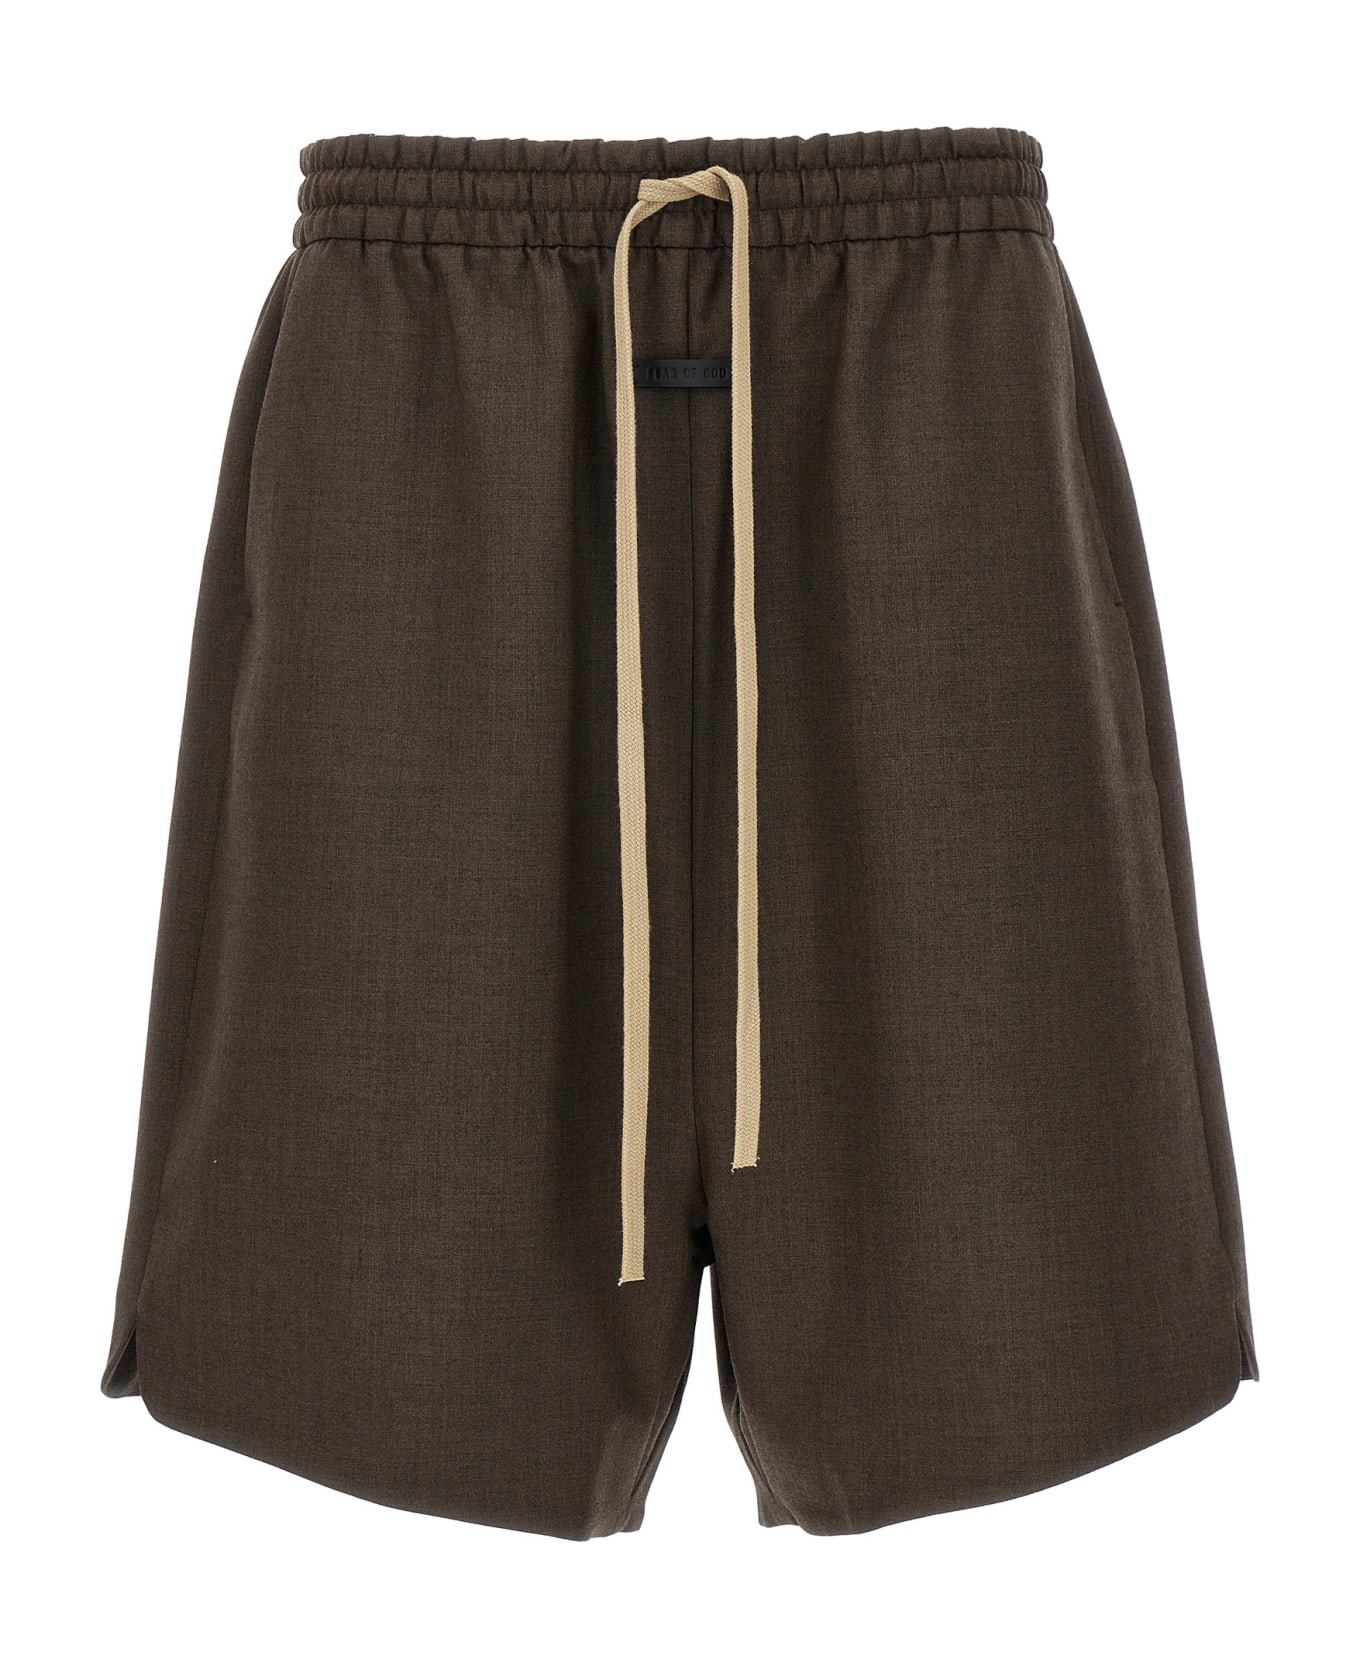 Fear of God 'relaxed' Shorts - Brown